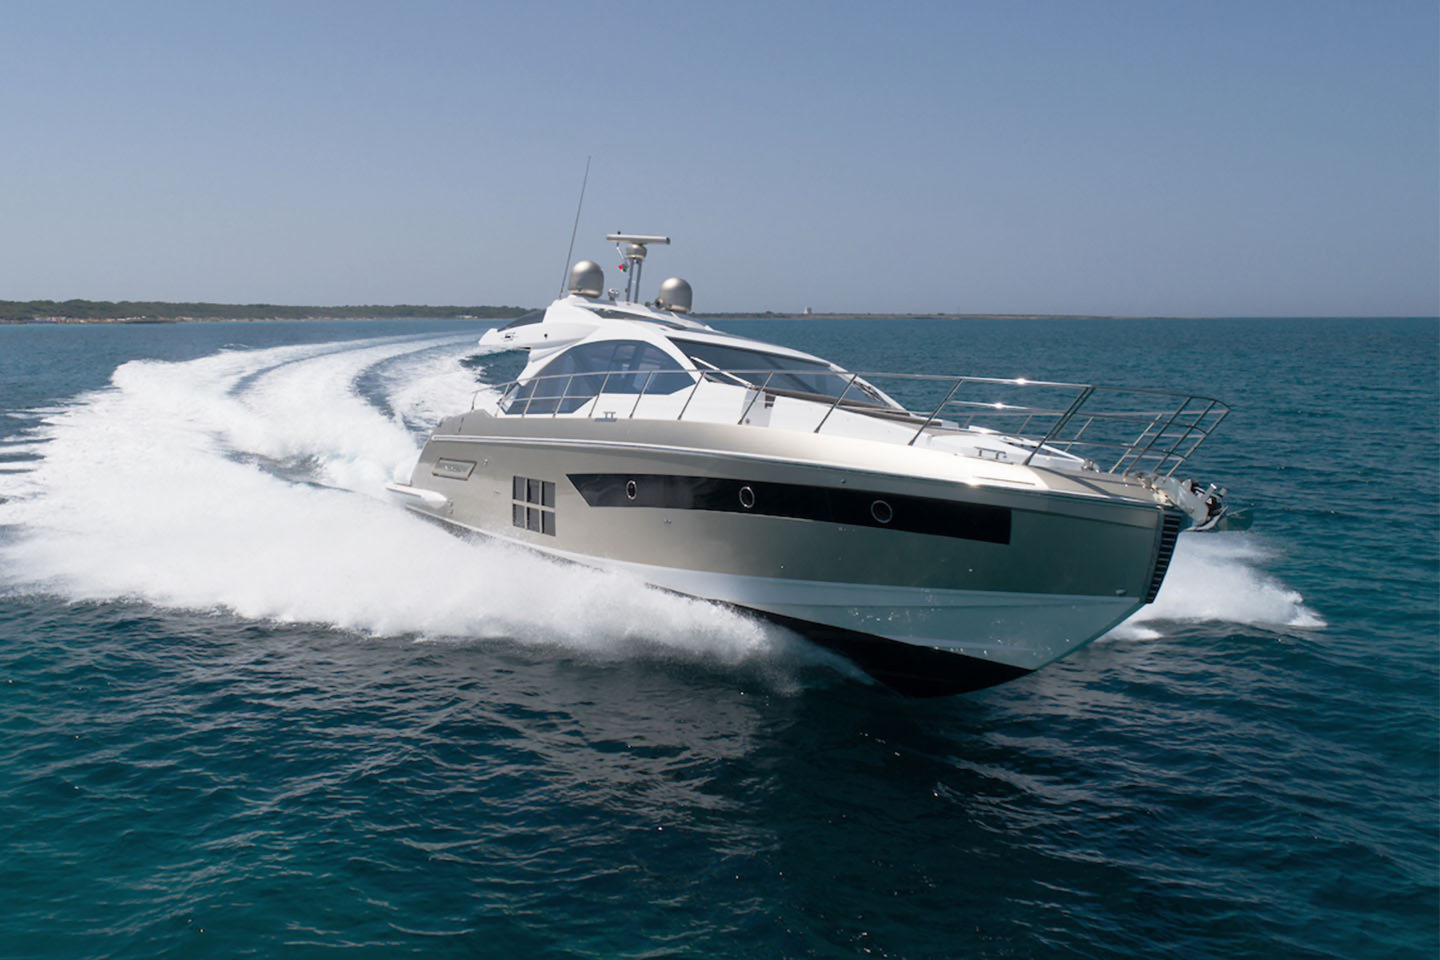 360 VR Virtual Tours of the Azimut S6